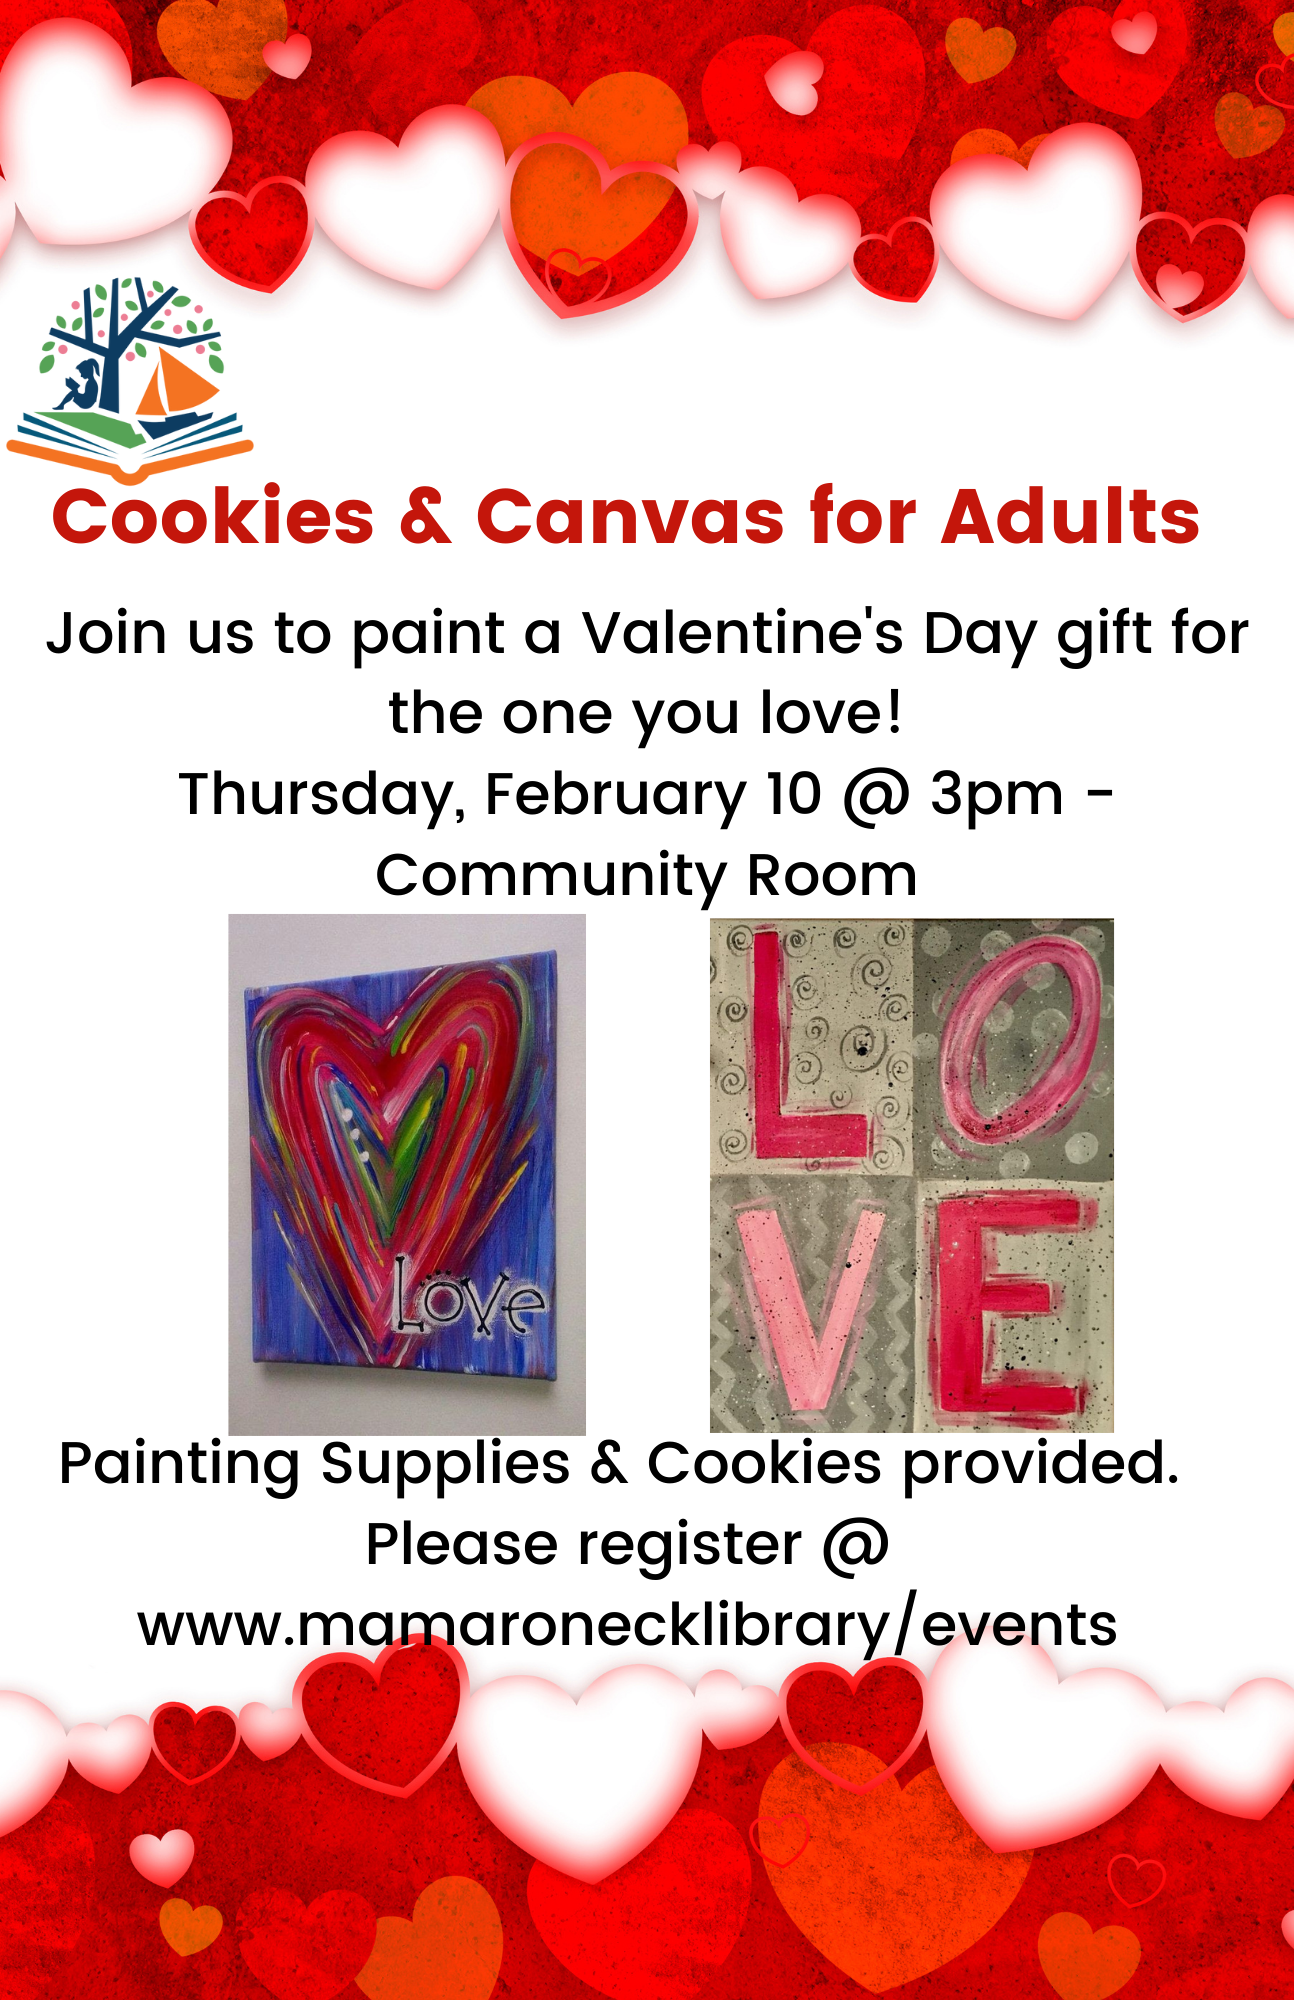 Cookies & Canvas for Adults - paint a Valentine's Day gift for the one you love - Feb. 10s